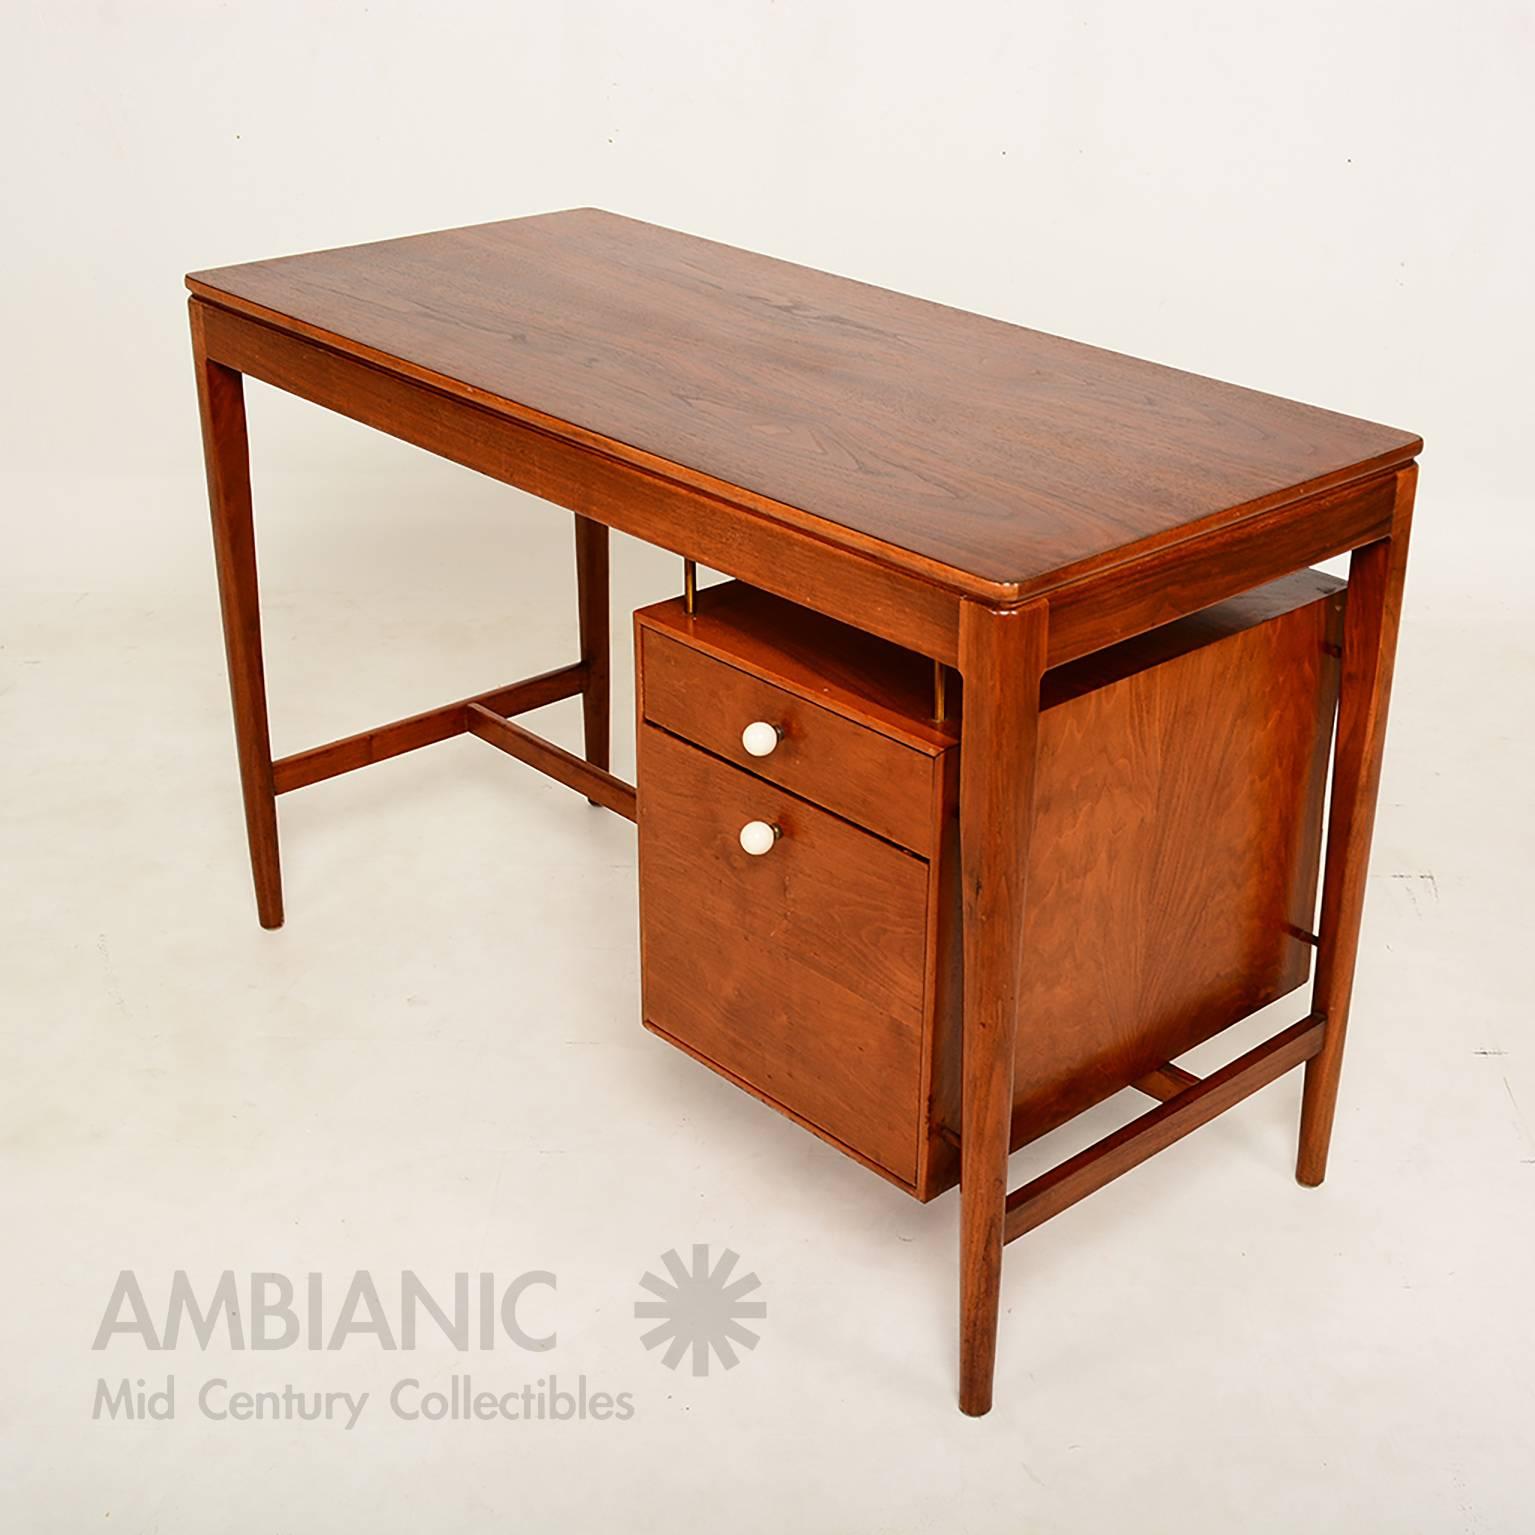 Lacquered Midcentury Walnut Desk by Drexel